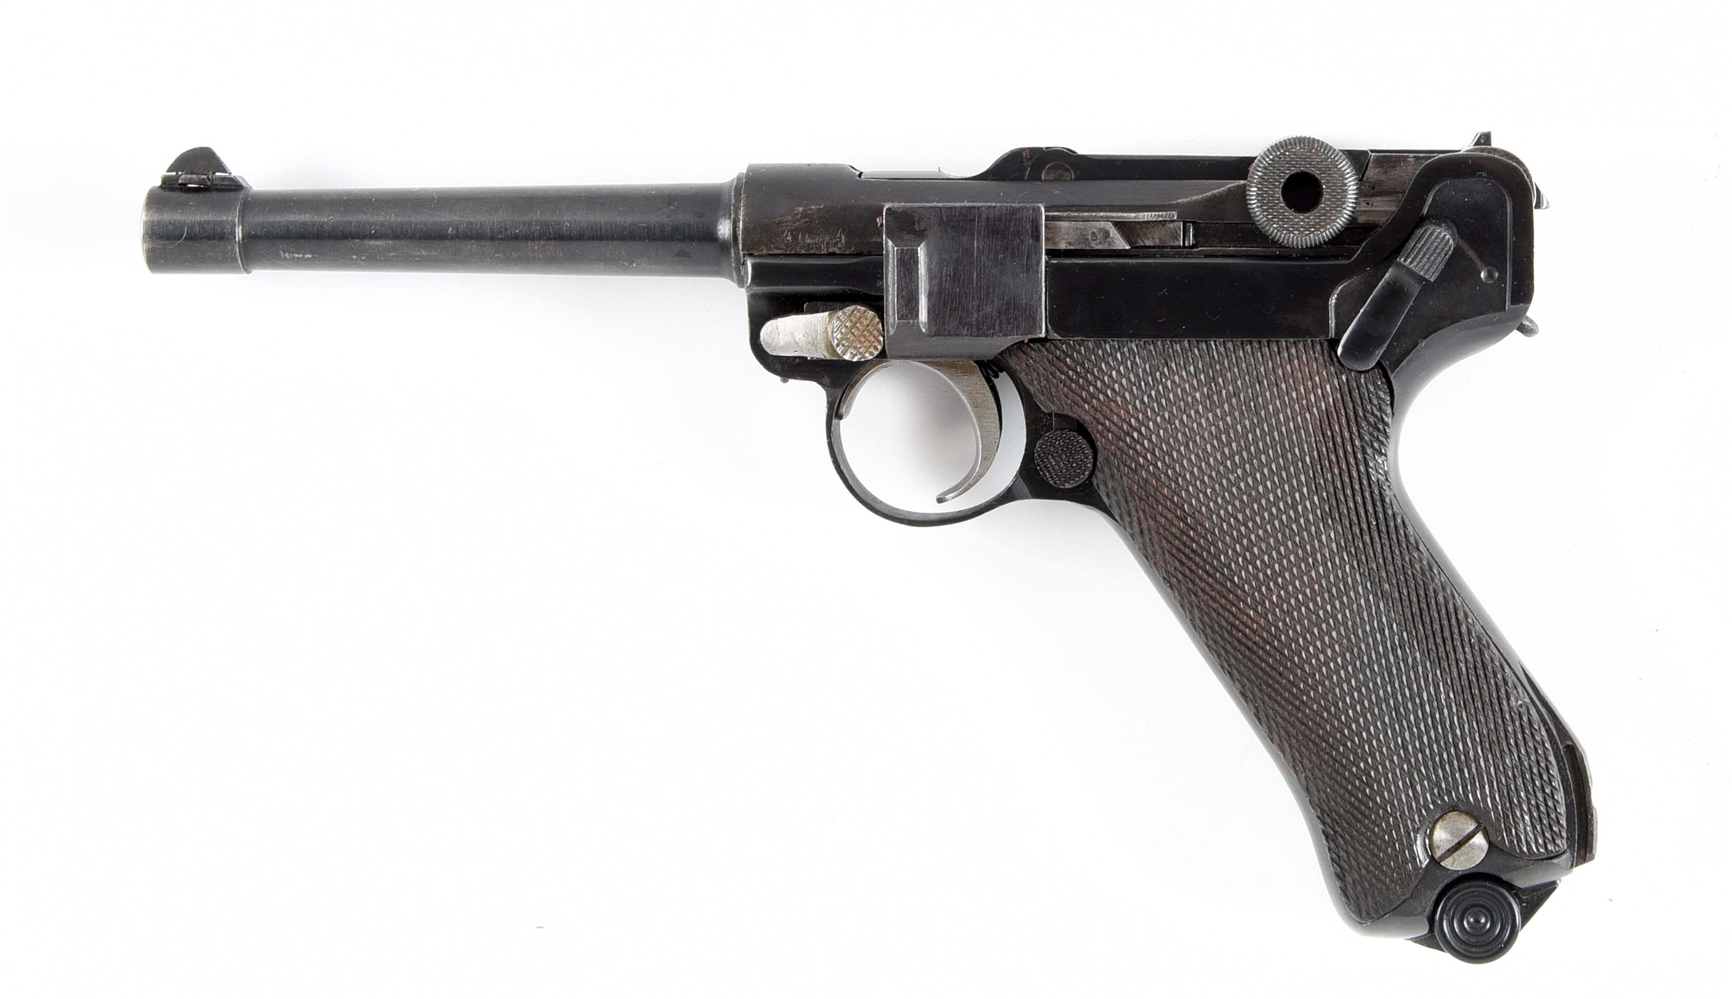 (C) IMPERIAL GERMAN P.08 LUGER SEMI-AUTOMATIC PISTOL WITH FINNISH BARREL.